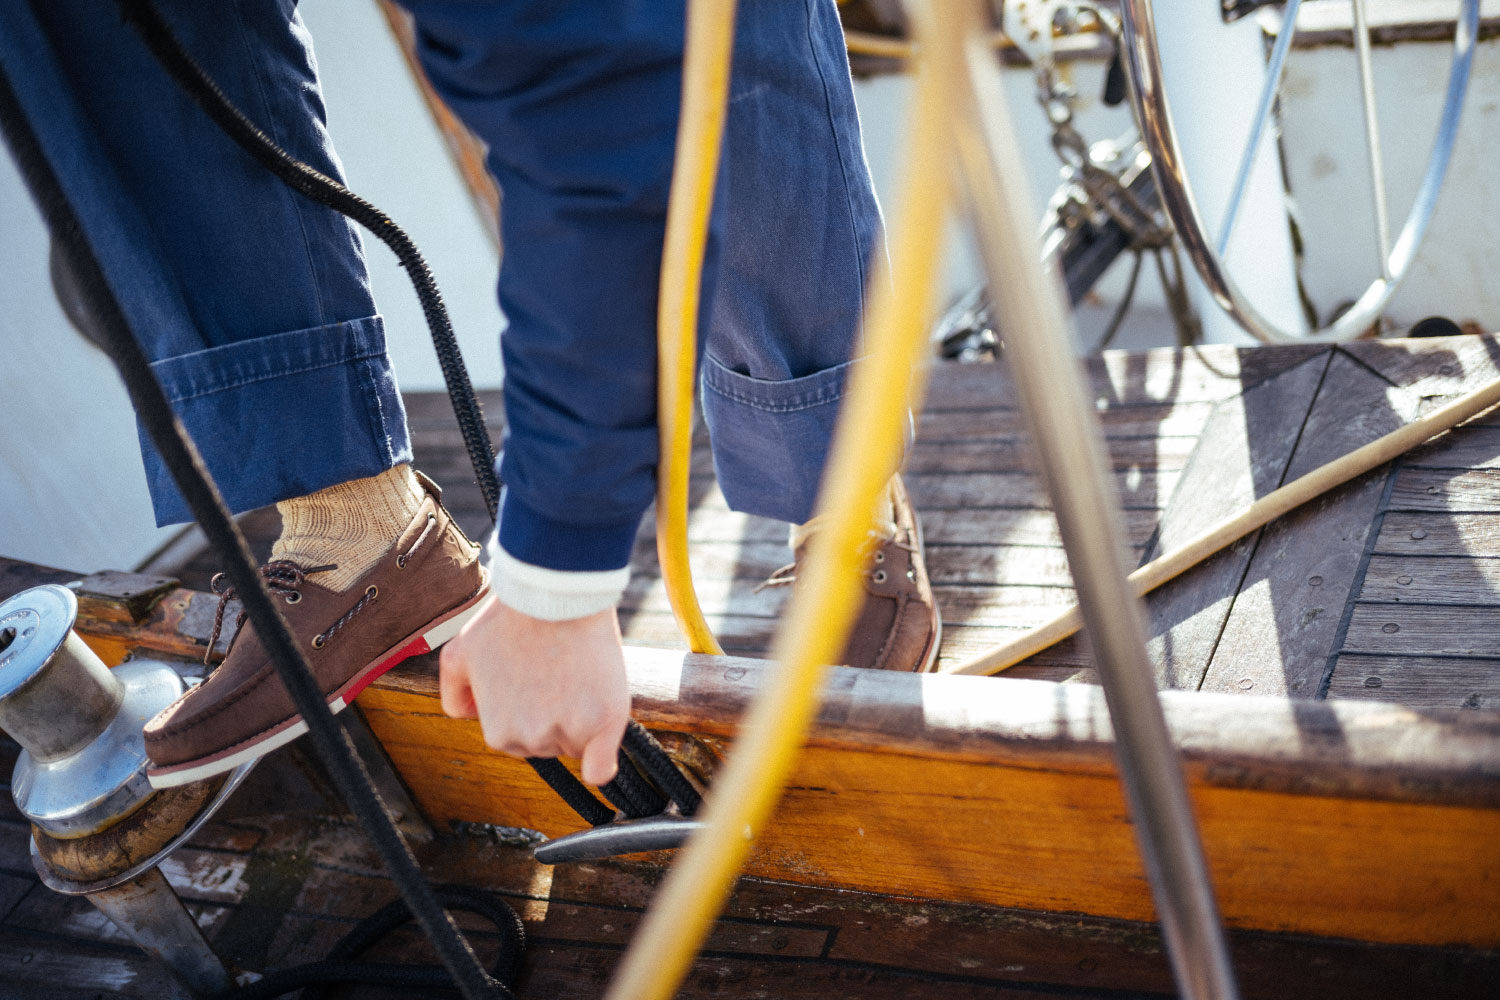 A person tying a sailboat up to the dock wearing the Herschel Supply Company x Sperry Authentic Original Lug Chukka shoes in Brown/Blanc de Blanc